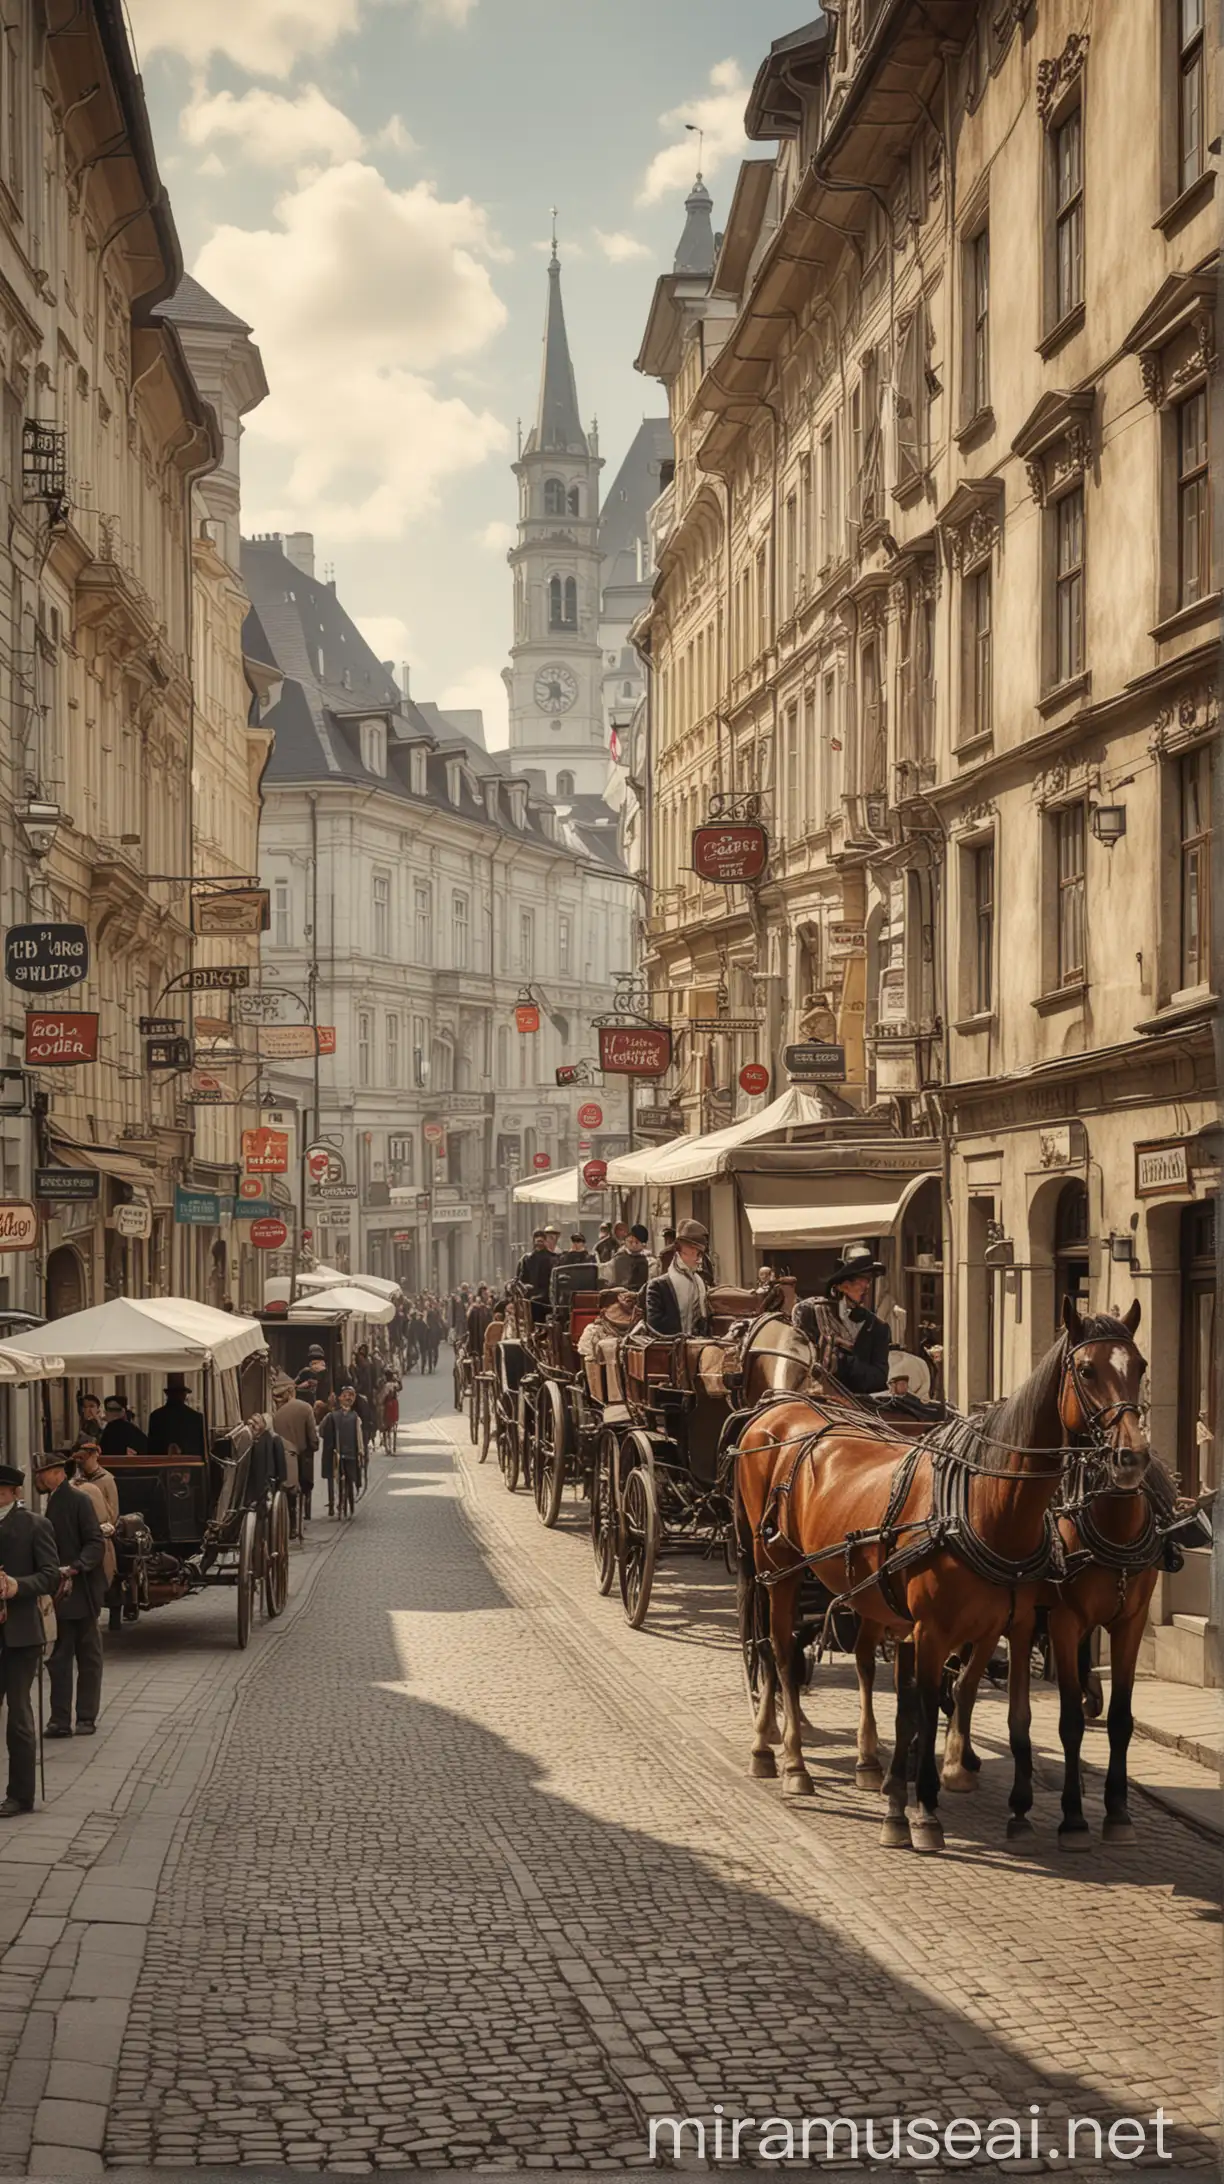 Vintage Street Scene in Early 1900s Linz Austria with HorseDrawn Carriages